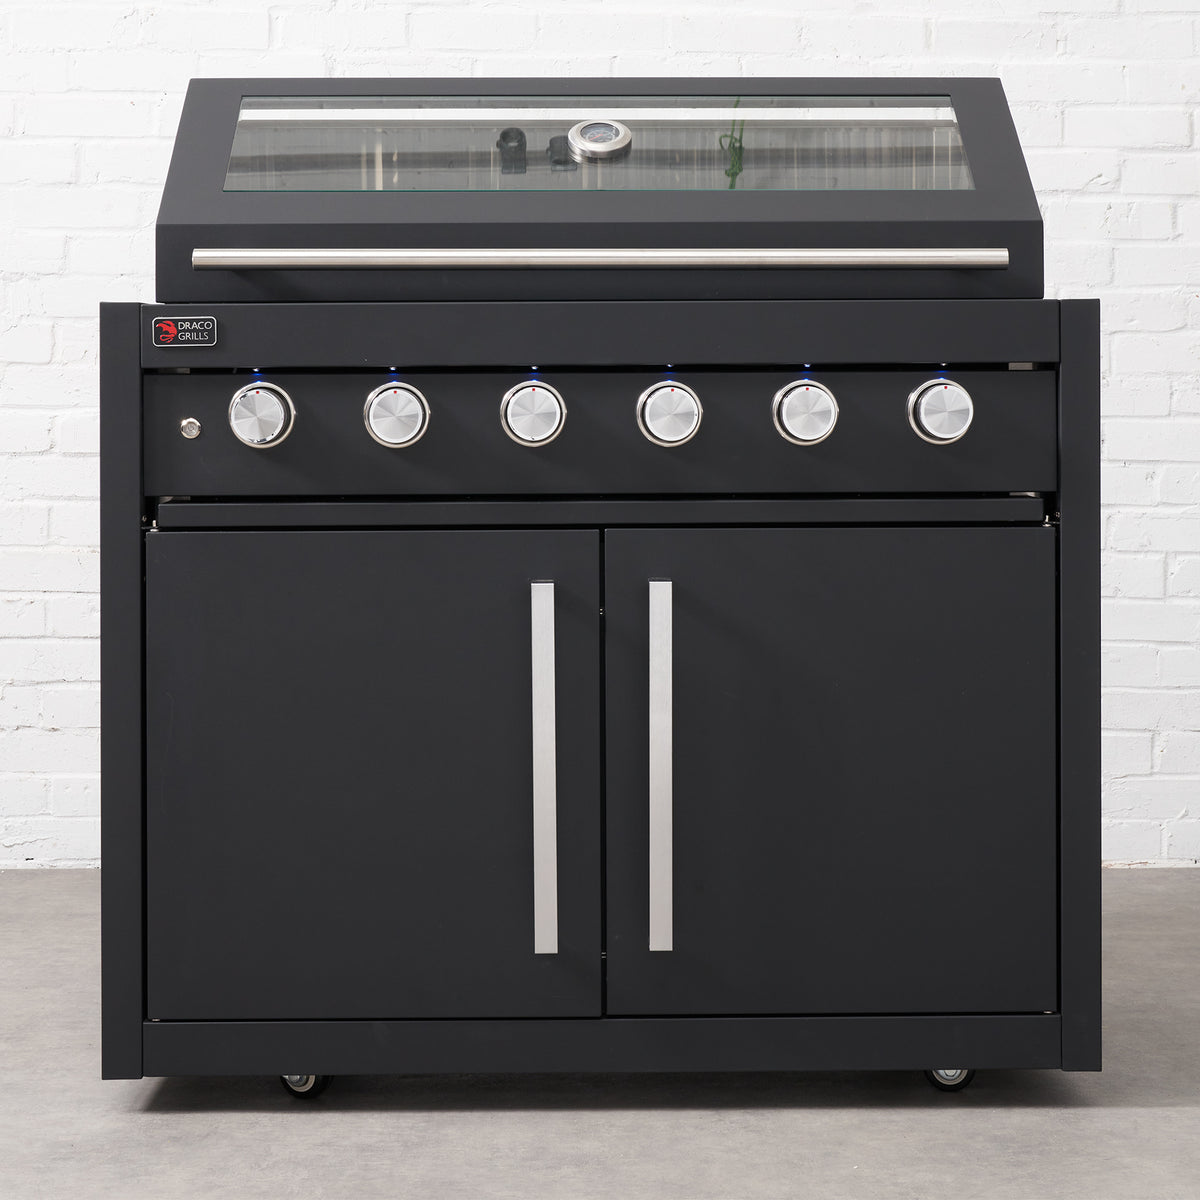 Draco Grills Fusion 6 Burner Black Outdoor Kitchen with Modular Side Burner and Double Fridge